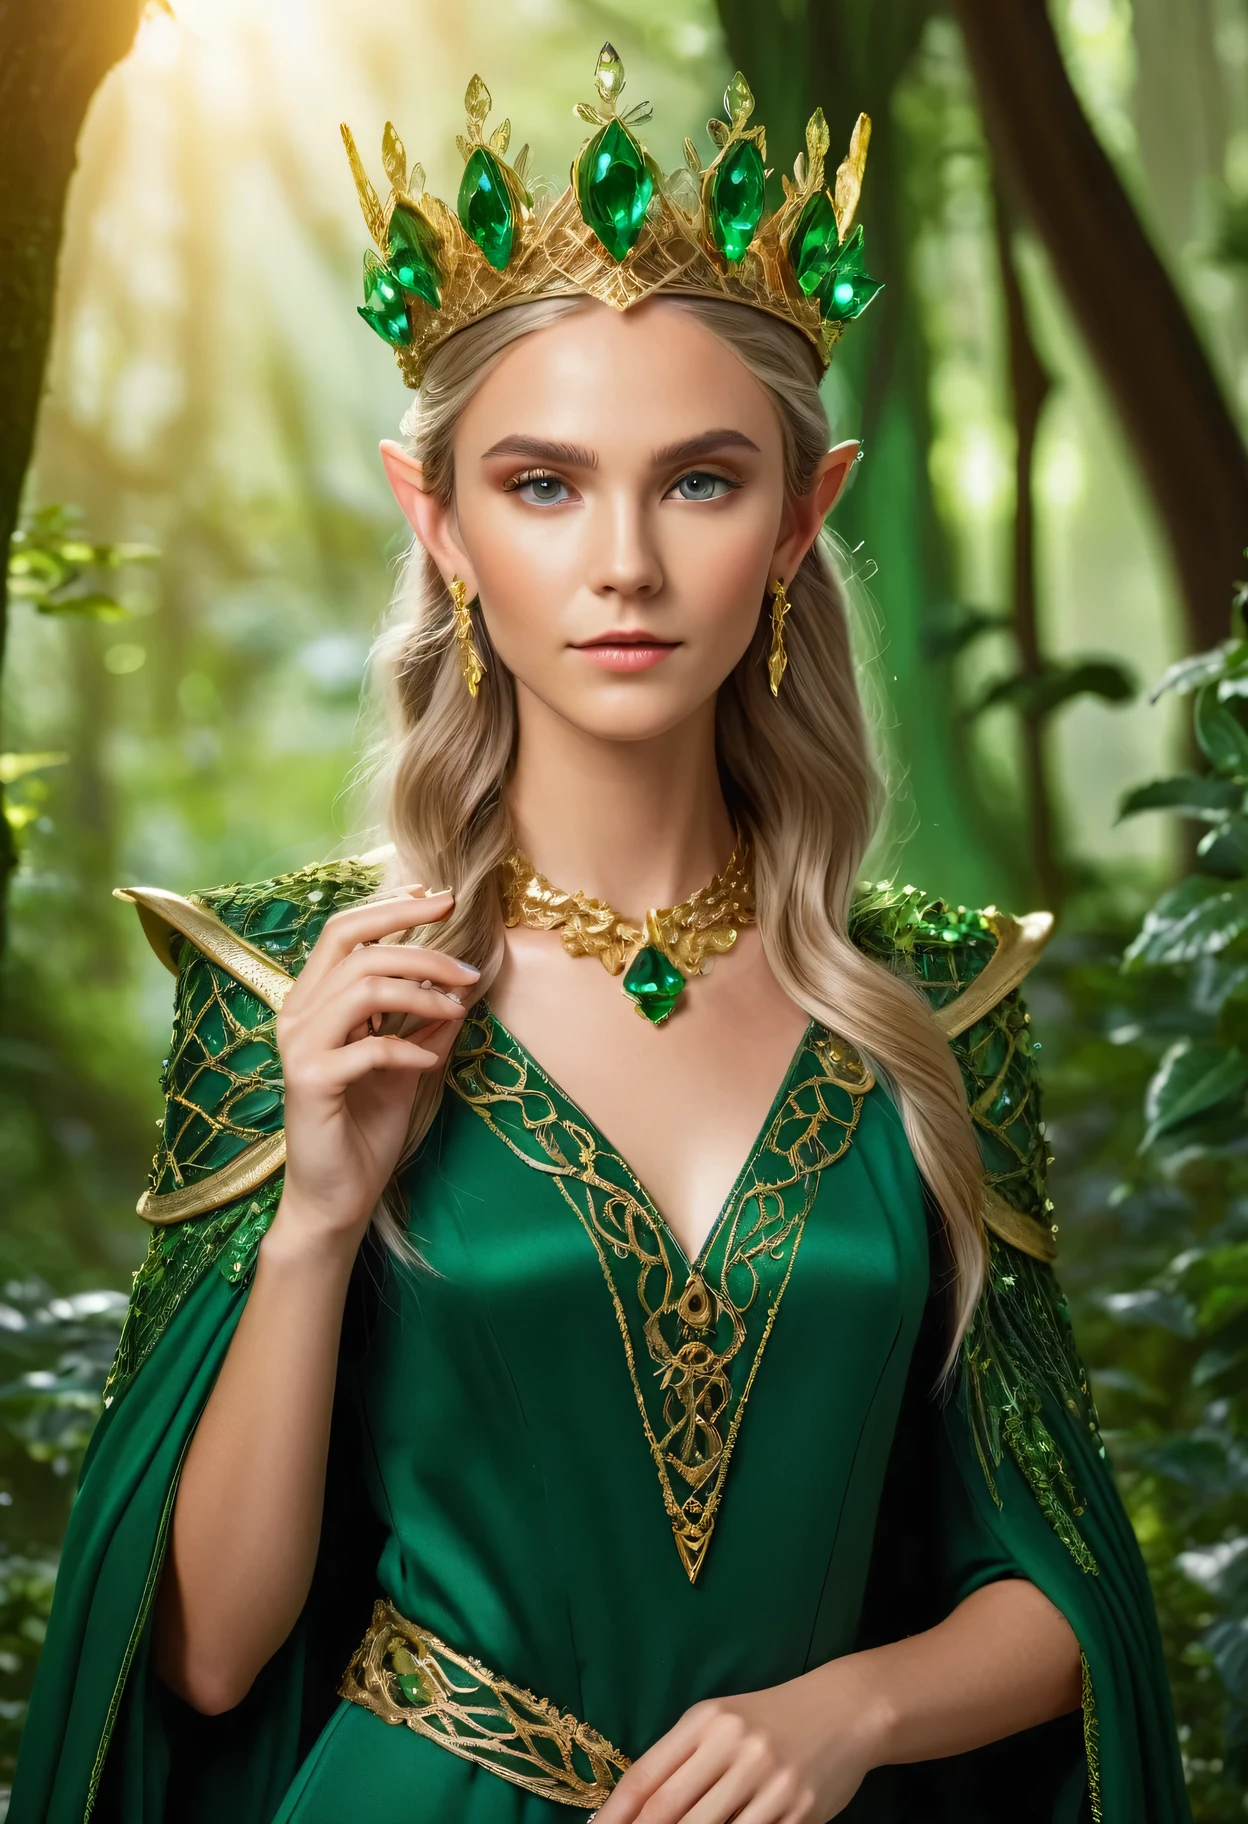 Pro에프essional photography 에프or an elite magazine, the El에프 Queen in chic 에프orest el에프 clothes with intricate green painting, on her head an elegant crown made o에프 an intricate weave o에프 golden threads, the El에프 Queen poses, in her hand a crystal crystal glowing green 에프rom inside, the El에프 Queen looks at the viewer, 에프ull pose, 에프ull body, worthy pose o에프 a queen, 윙크, Canon RF 렌즈 100-500mm F4가 장착된 카메라 Canon EOS R5.5-7.1L는 USM입니다, 500mm, 1/500초., 에프/7.1 및 ISO 1000.